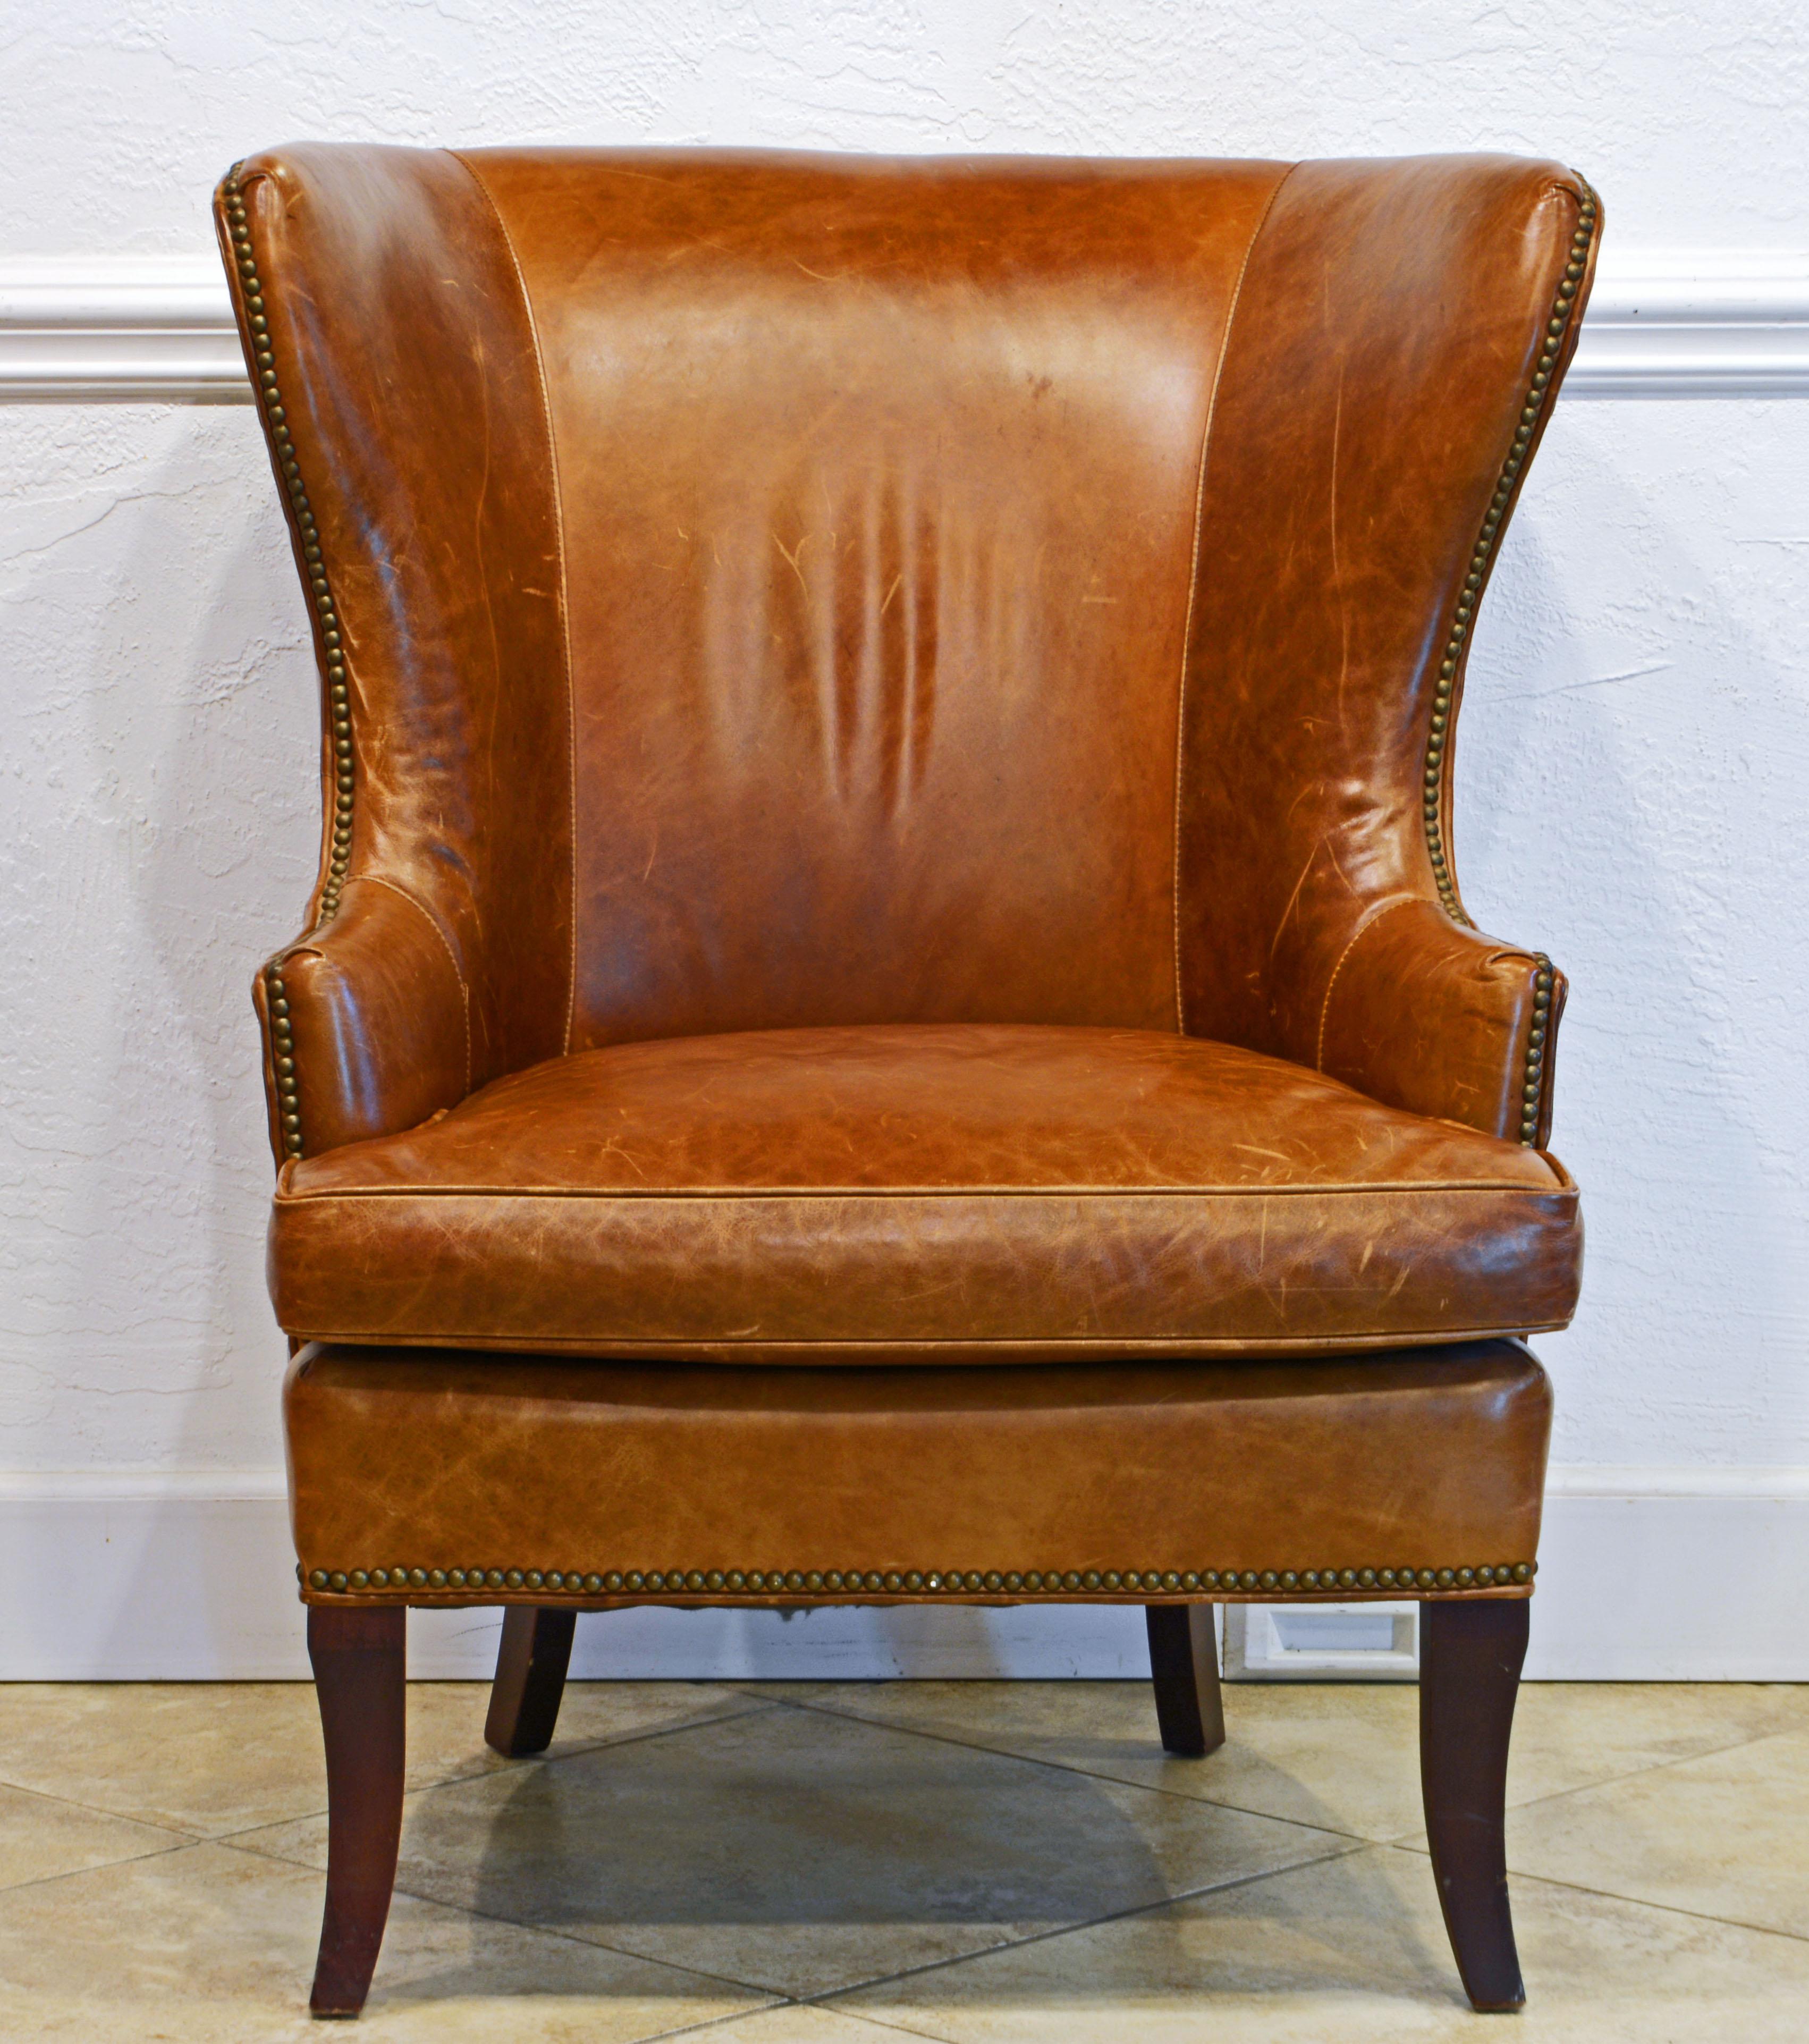 This welcoming wingback leather chair is a modern take on the traditional English Wingback chairs dating back to the time of Queen Anne. The discrete nail head trim accentuates the great lines of the chair. It is a very comfortable chair and the